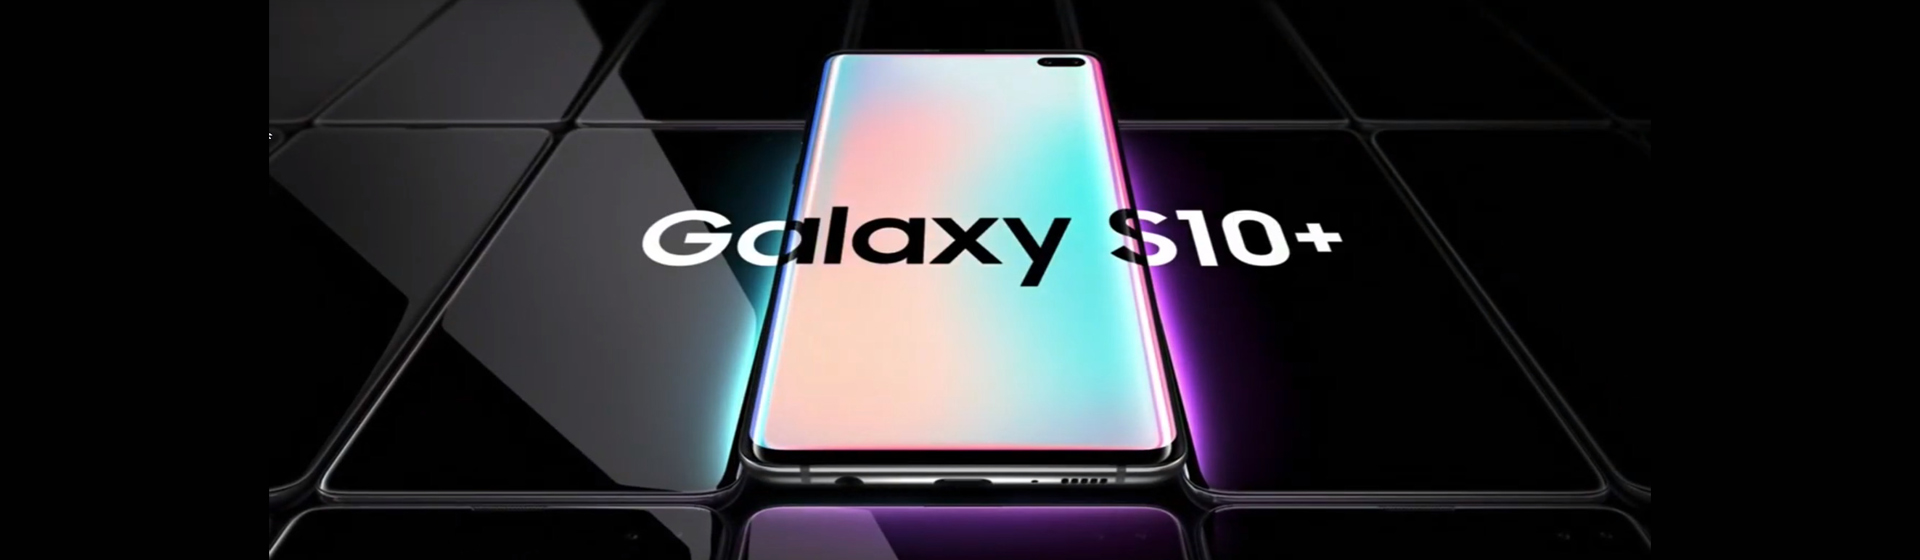 S10e is the best android mobile rolled out the stable build of ... out the highly-anticipated Android 10 update to S10 users.